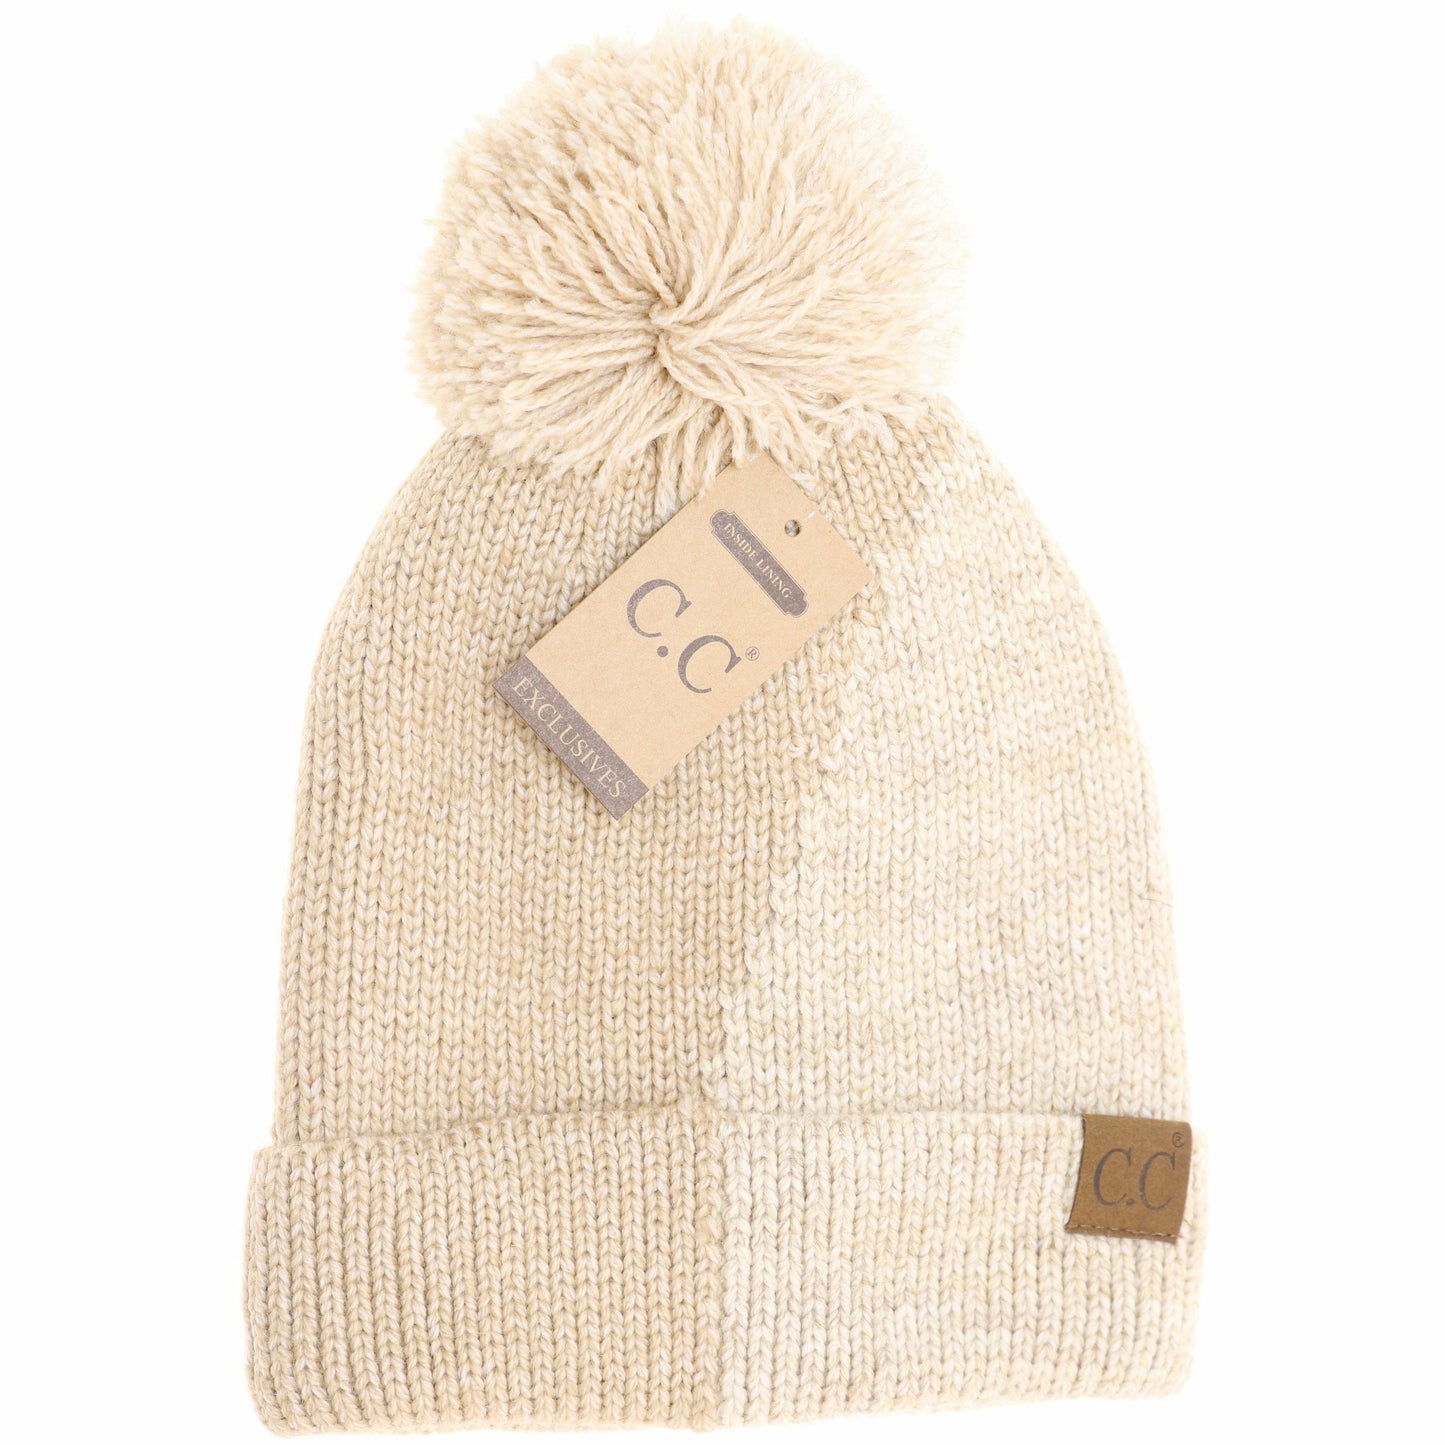 CC Adult Two Tone Knit Beanie *Multiple Colors*